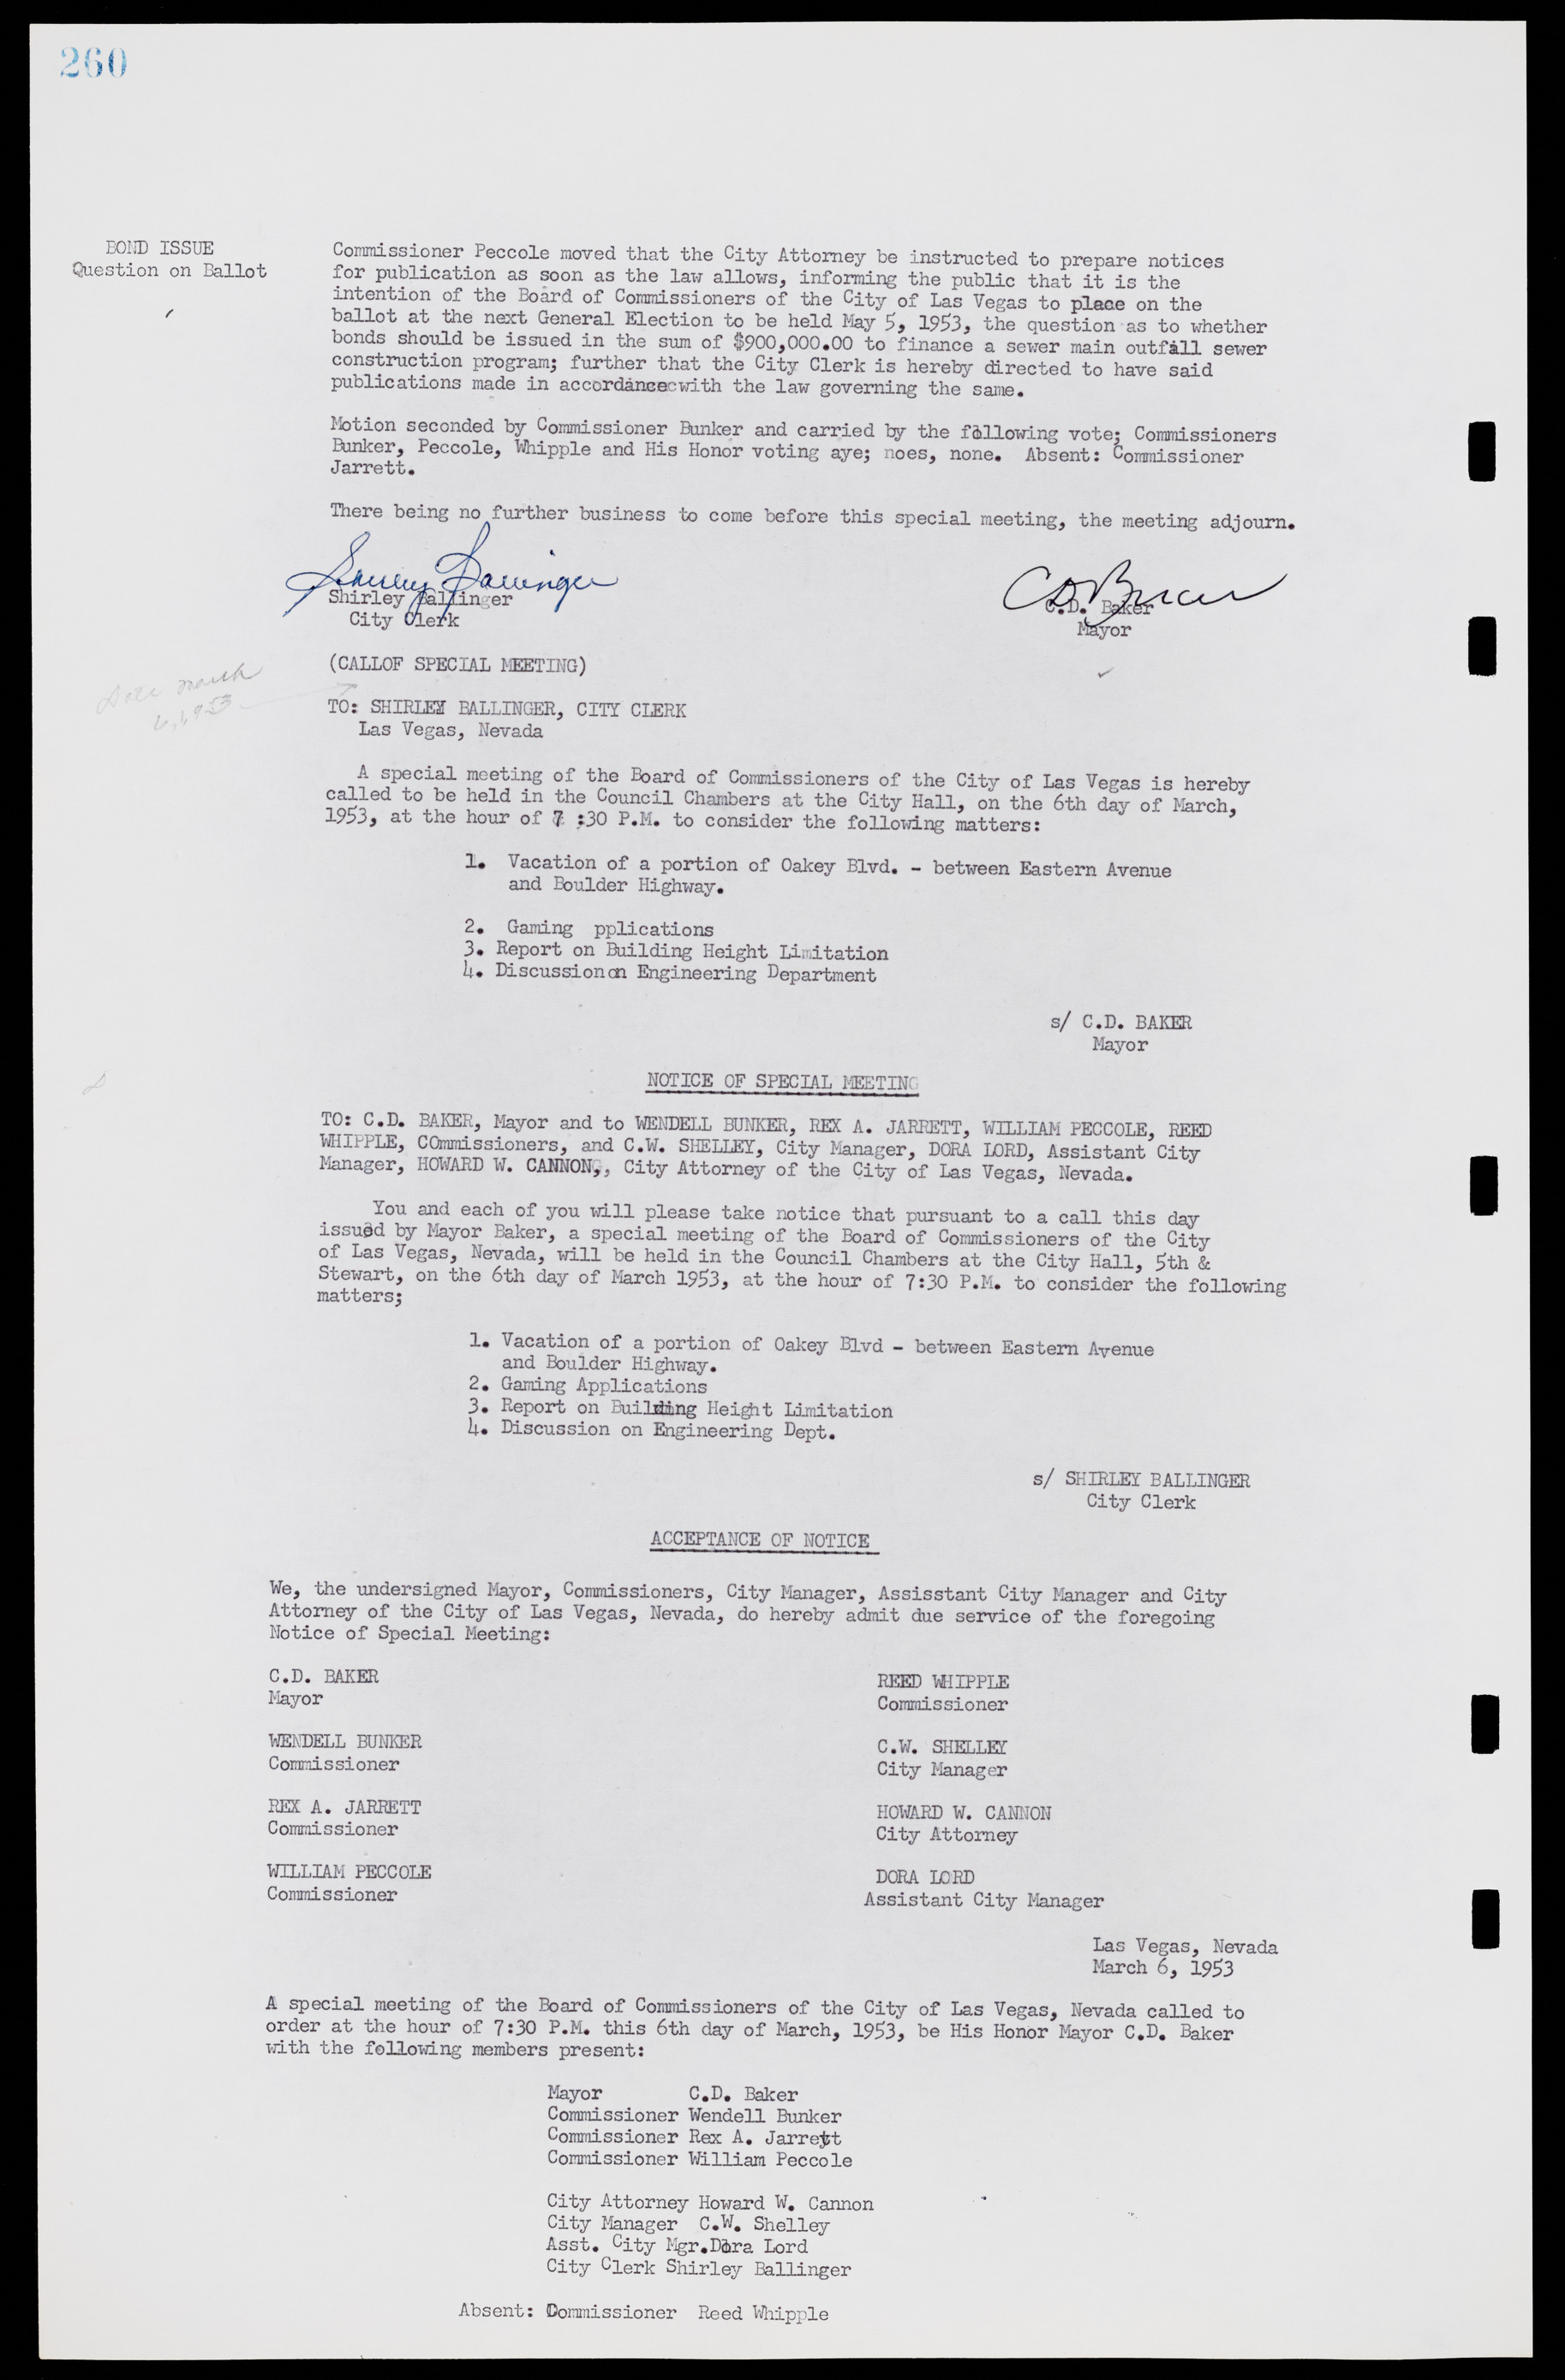 Las Vegas City Commission Minutes, May 26, 1952 to February 17, 1954, lvc000008-276